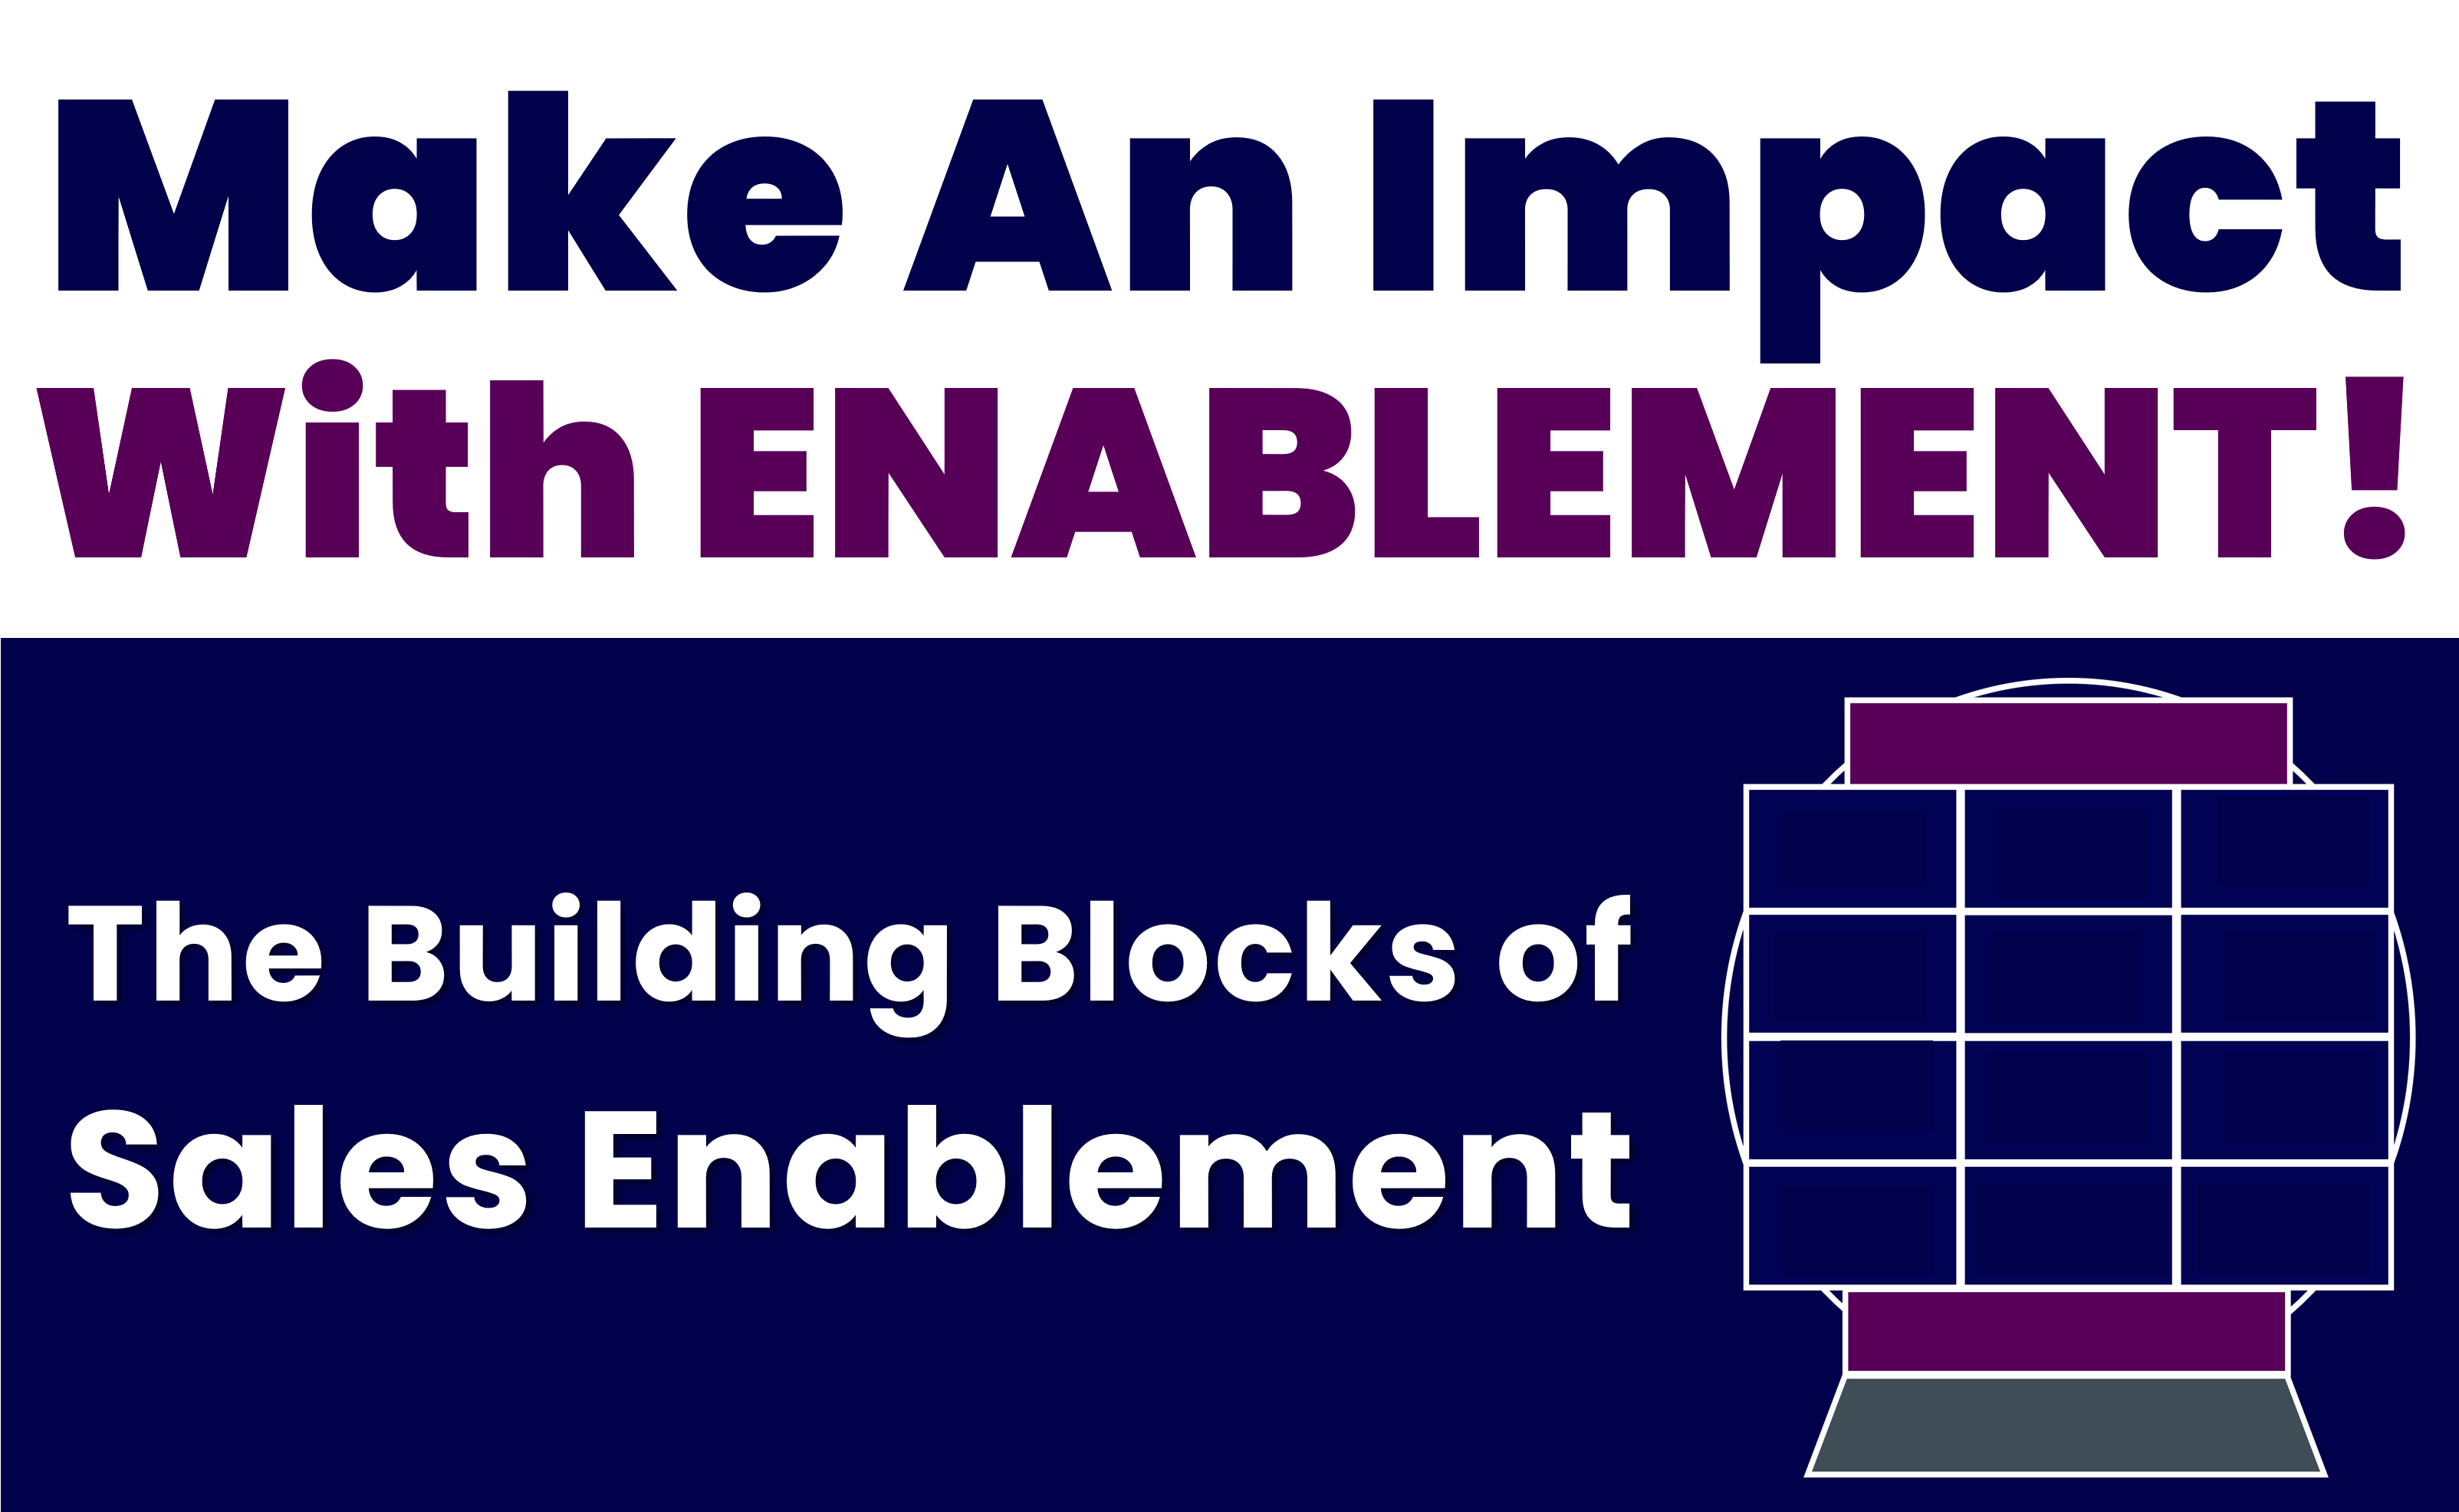 Make An Impact with Enablement